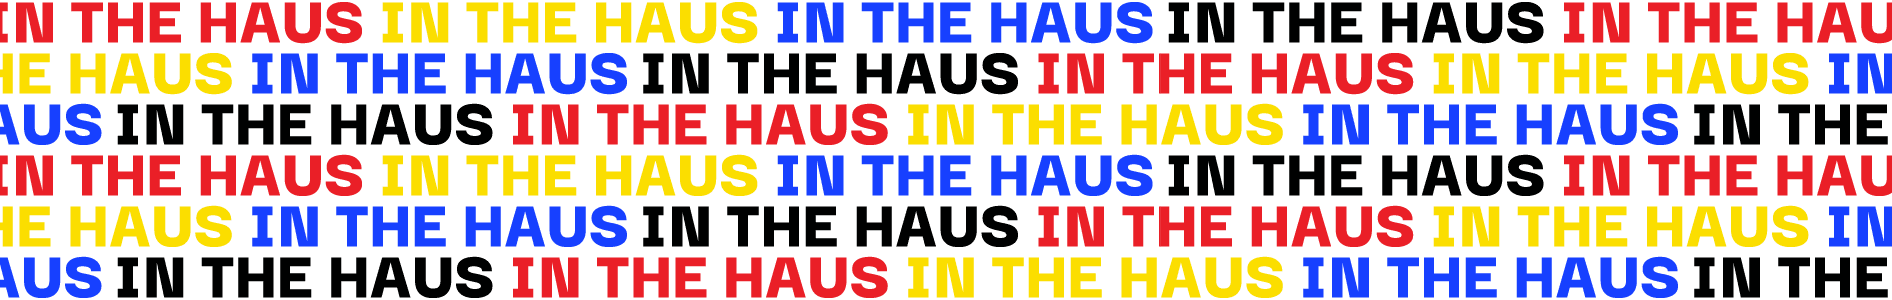 In the Haus typographic pattern